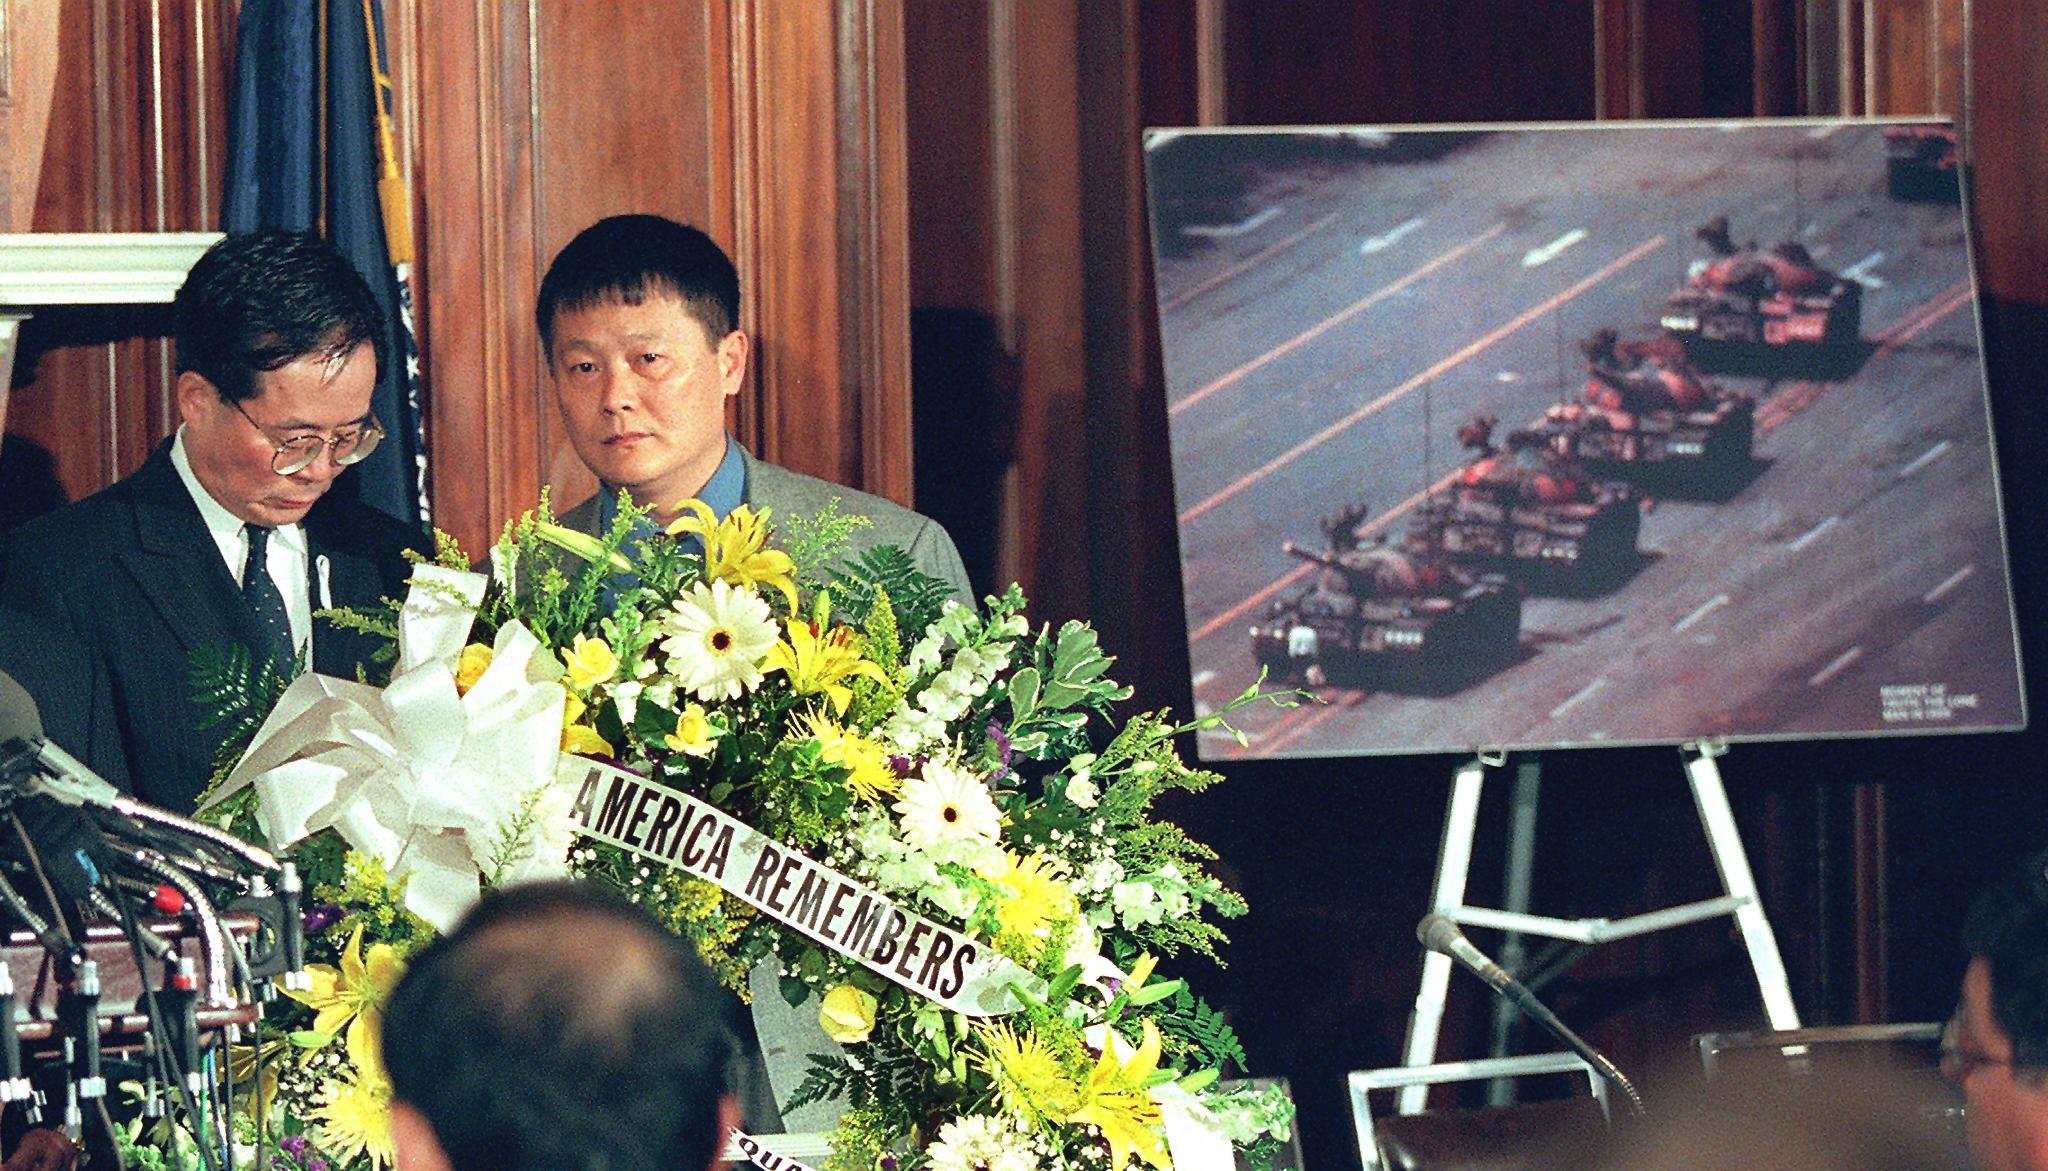 Former Chinese dissidents Harry Wu (L) and Wei Jingsheng (R) stand behind a wreath and next to the photo of a man standing in front of Chinese tanks during the Tiananmen Square Massacre during ceremonies June 4 on Capitol Hill marking the ninth anniversary of the event in Washington, DC. (LUKE FRAZZA/AFP/Getty Images)